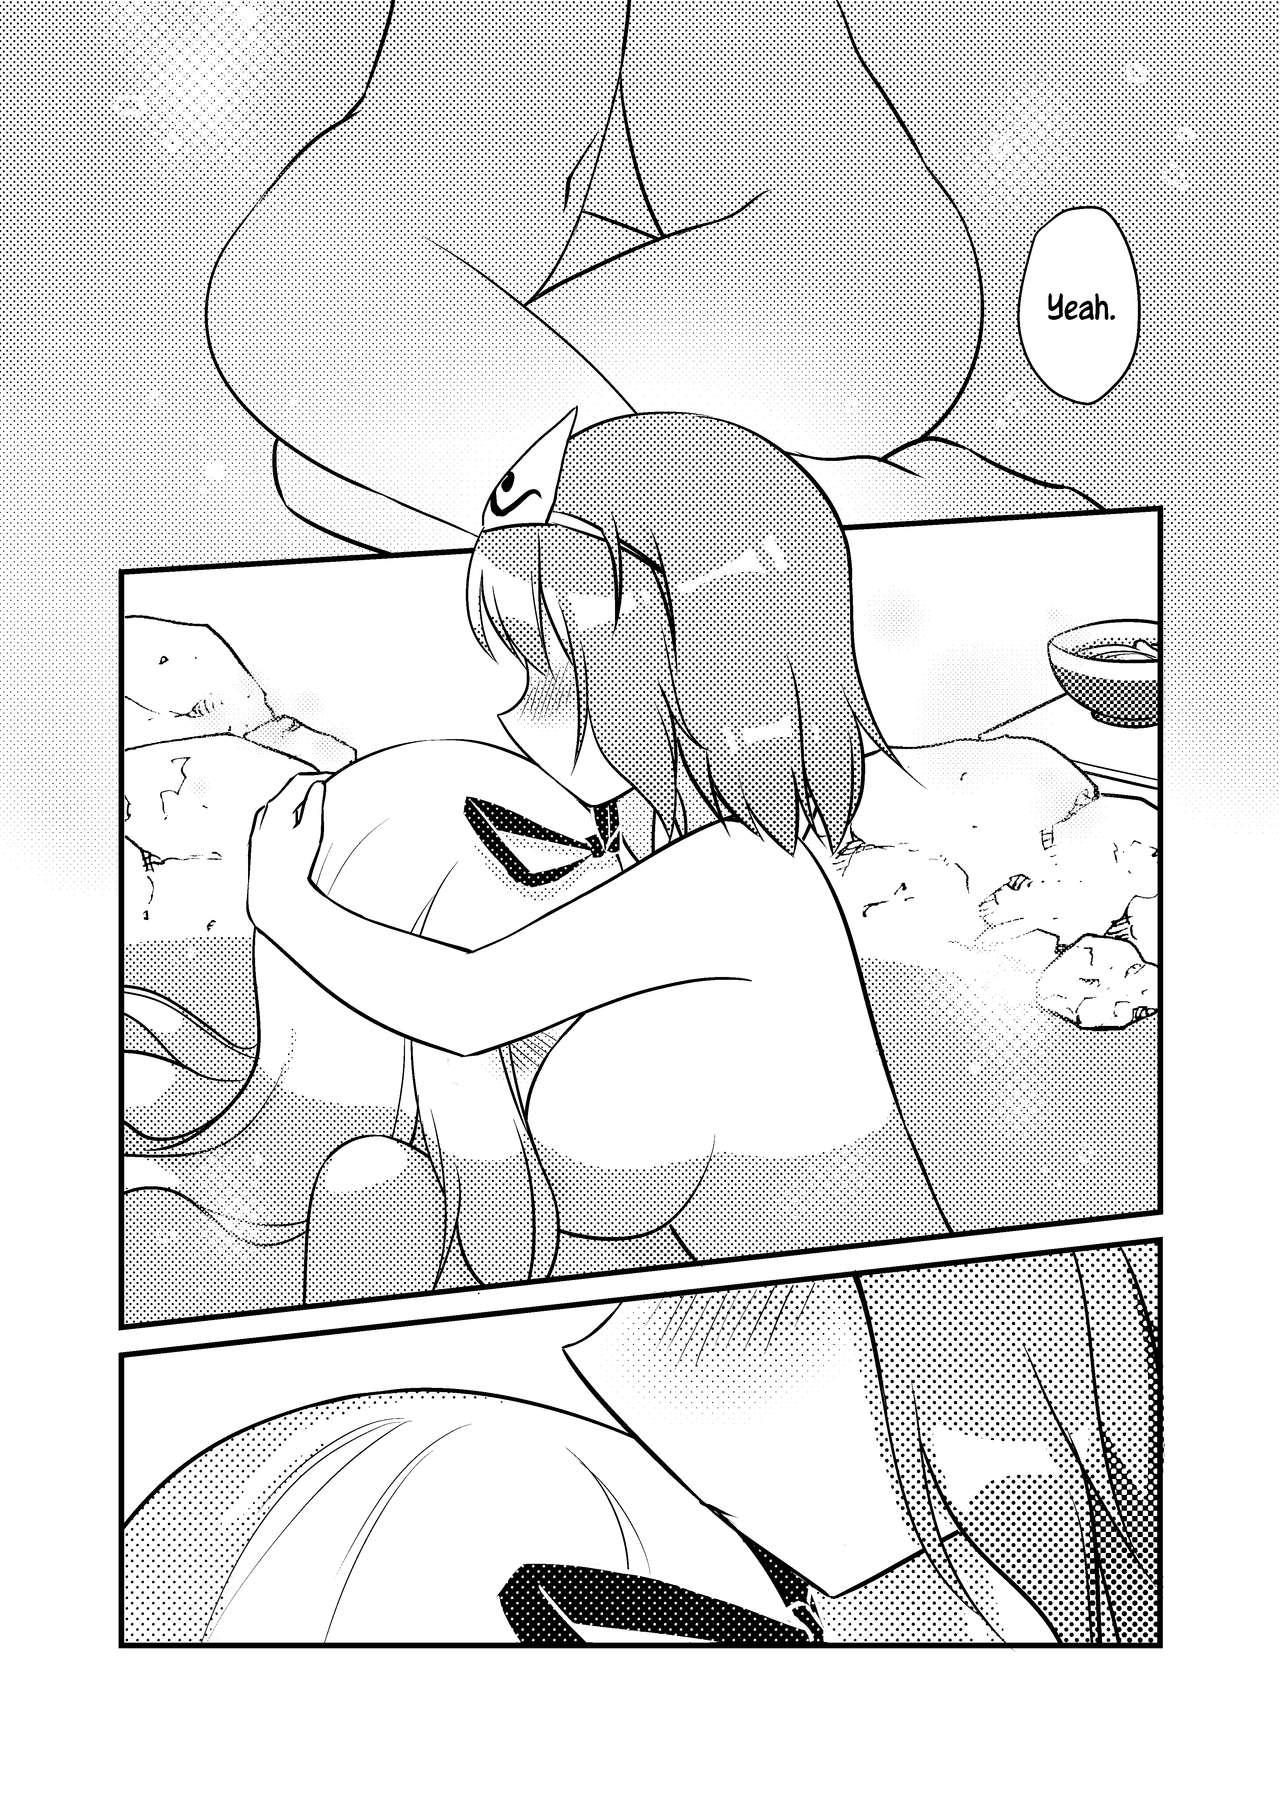 European ????一起泡温泉吧！ | ????Let's Soak in the Hot Spring! - Touhou project Outside - Page 10